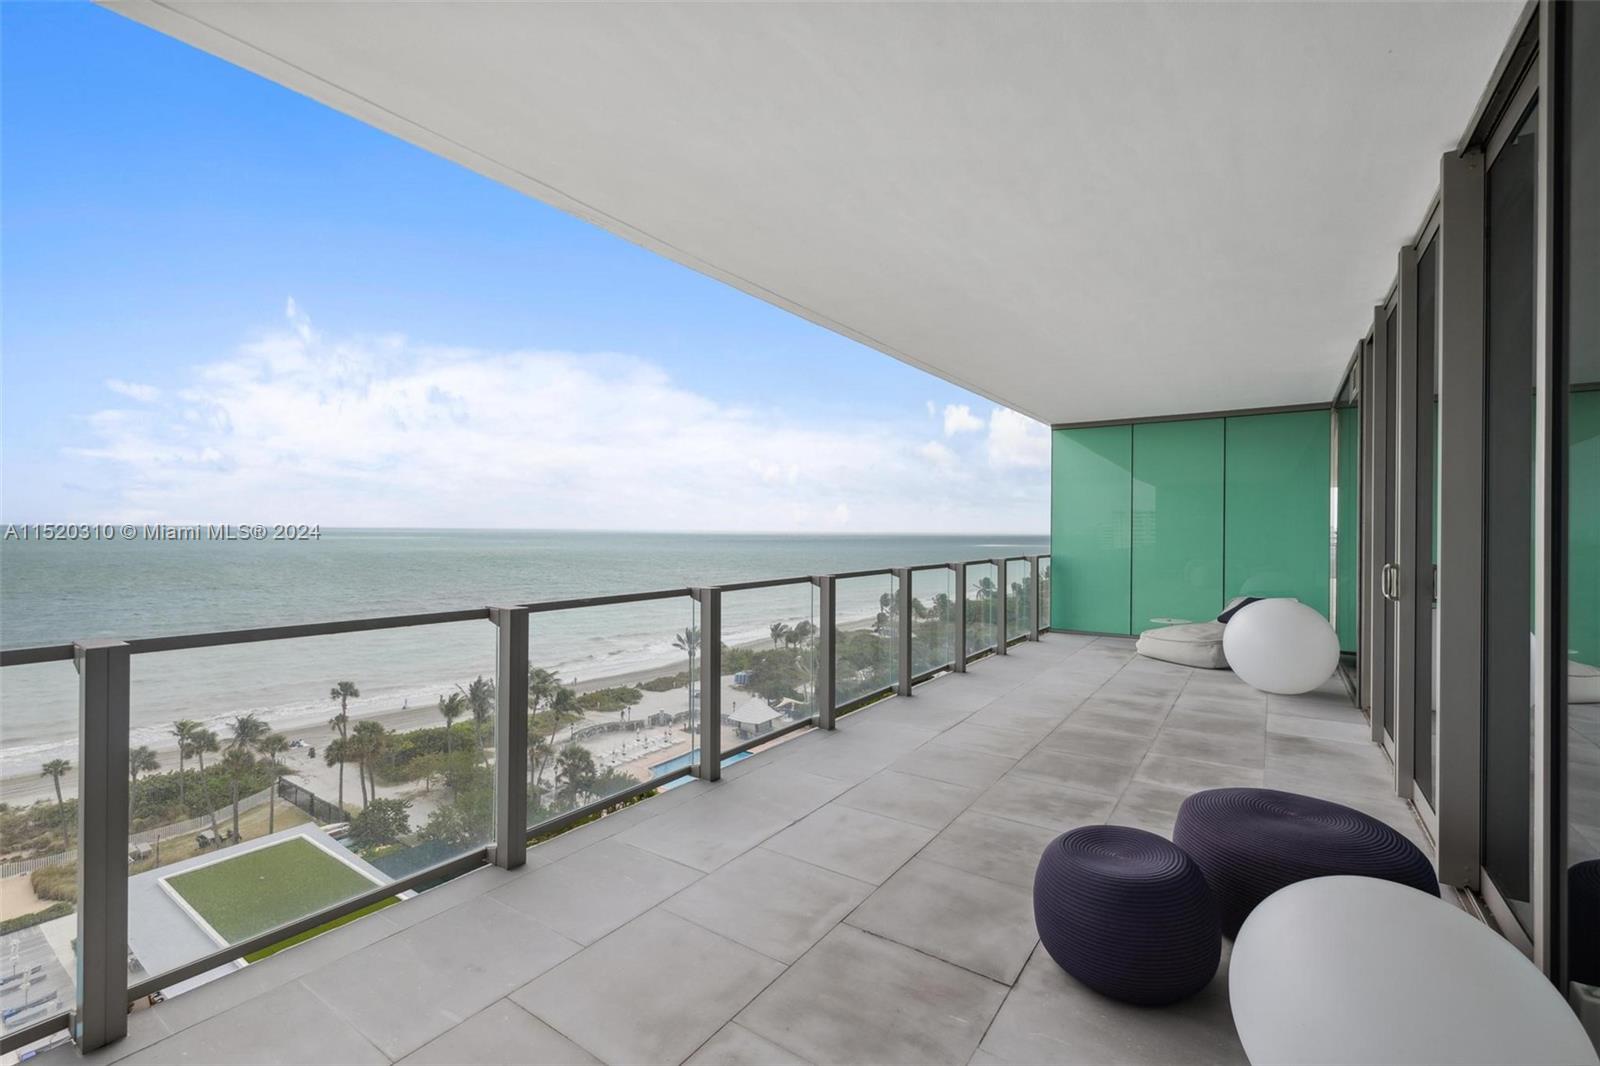 Property for Sale at 360 Ocean Dr 902S, Key Biscayne, Miami-Dade County, Florida - Bedrooms: 5 
Bathrooms: 6  - $8,350,000